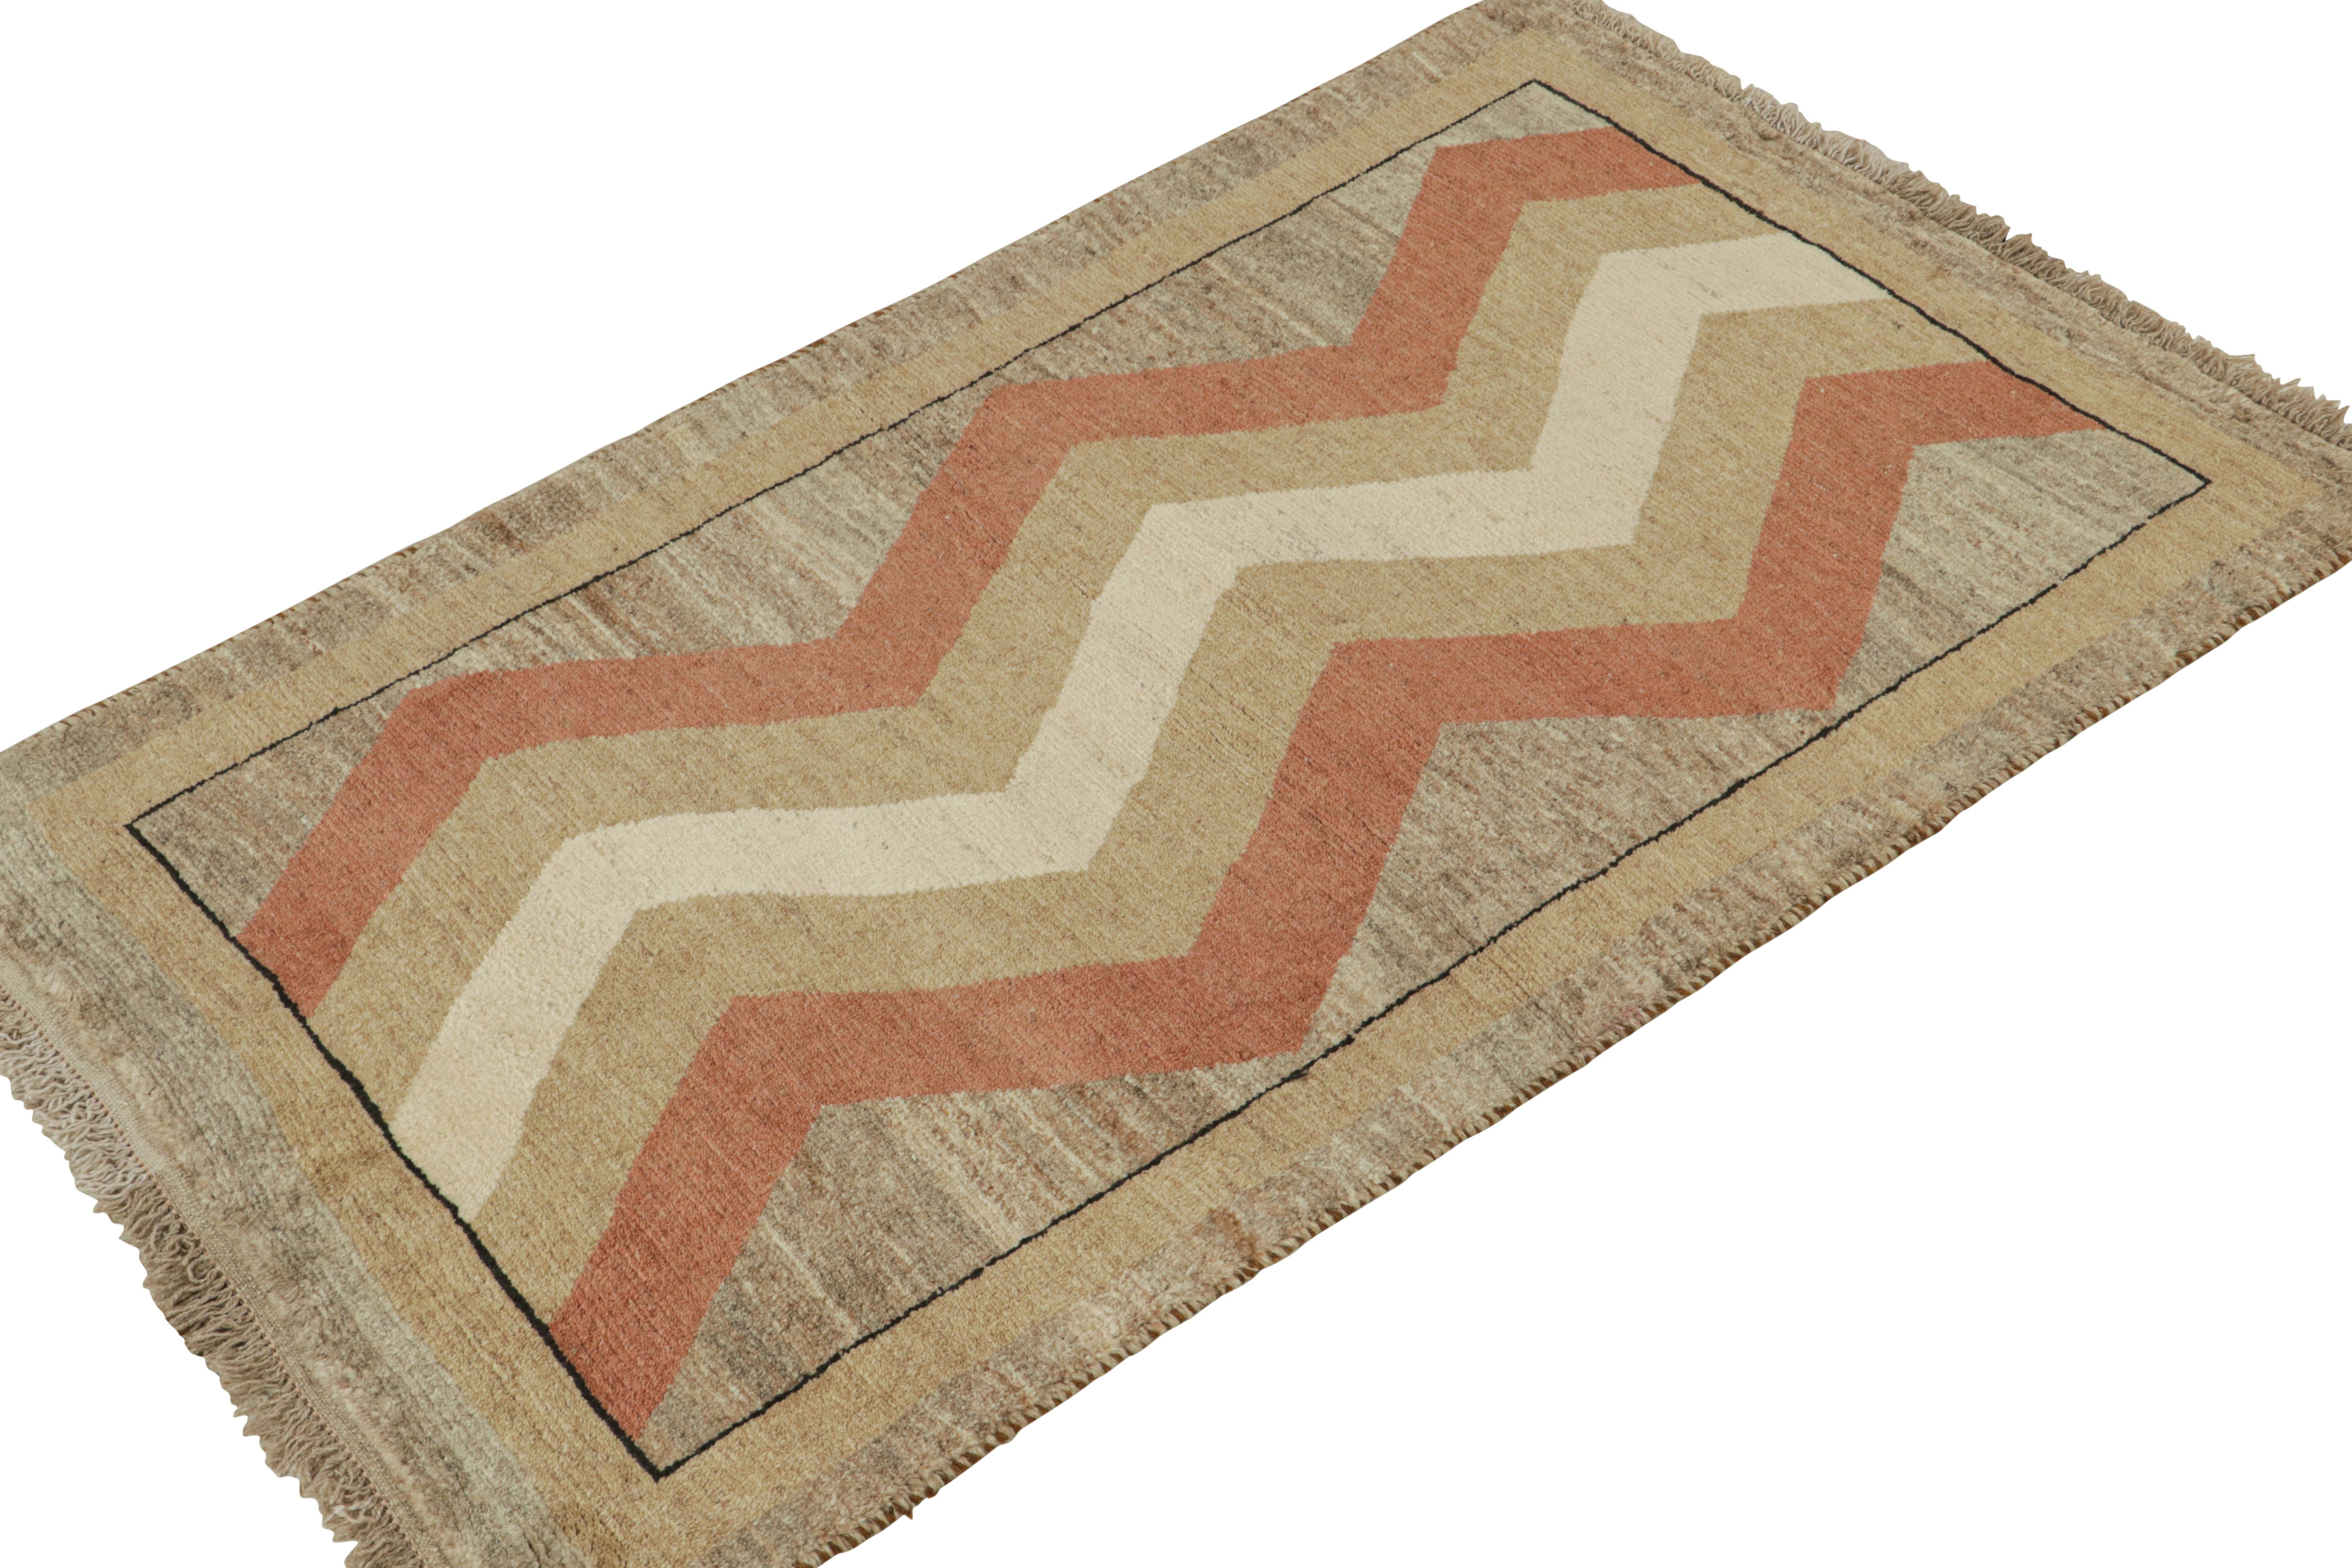 A vintage 3x5 Persian Gabbeh rug in a grand entry to Rug & Kilim’s curation of rare tribal pieces. Hand-knotted in wool circa 1950-1960.

On the Design:

This tribal provenance is one of the most primitive, and collectible shabby-chic styles in